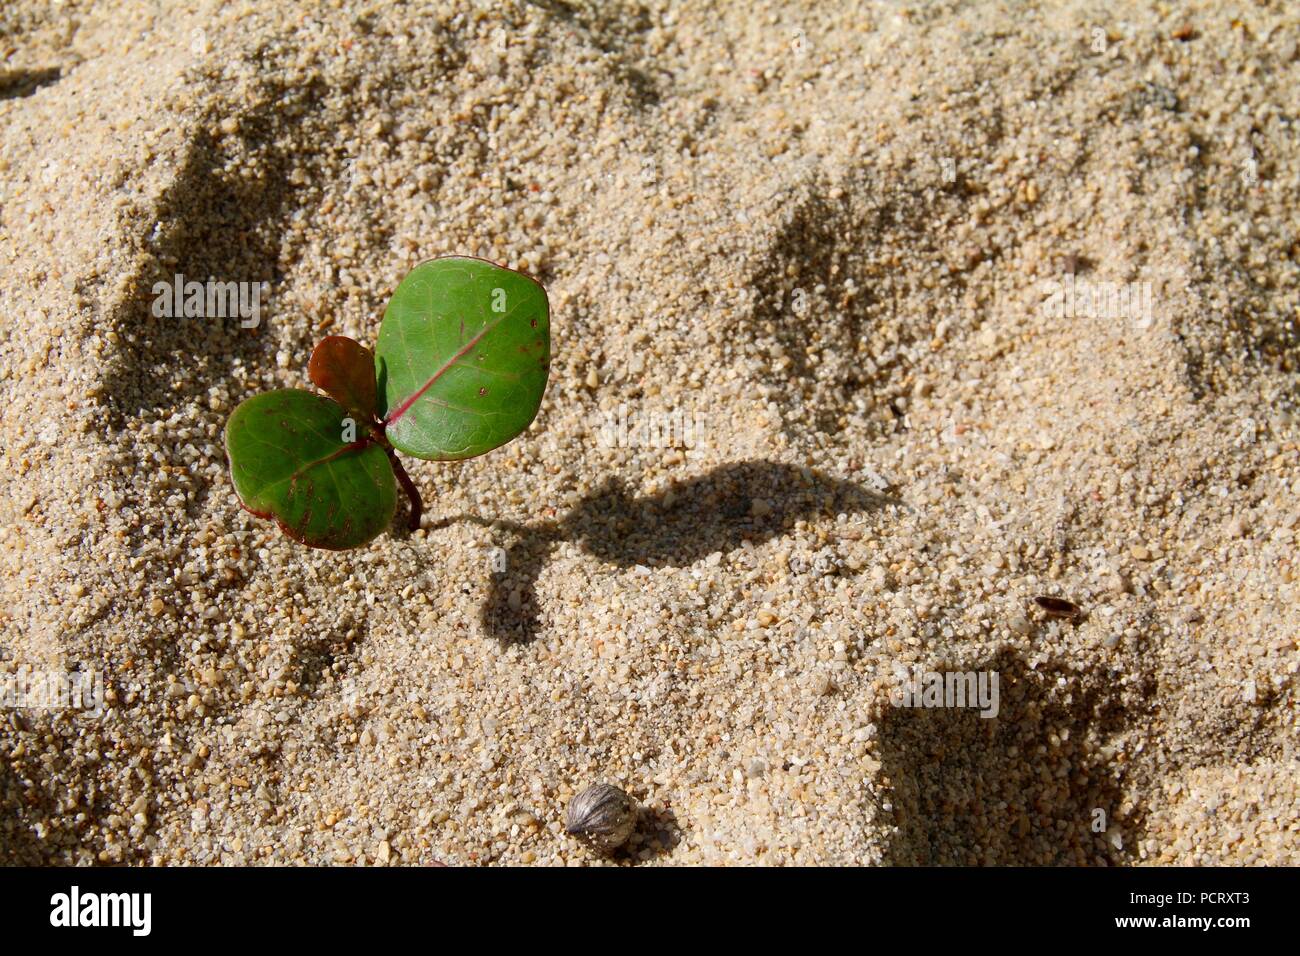 Two leaf seedling growing on a white sand beach Stock Photo